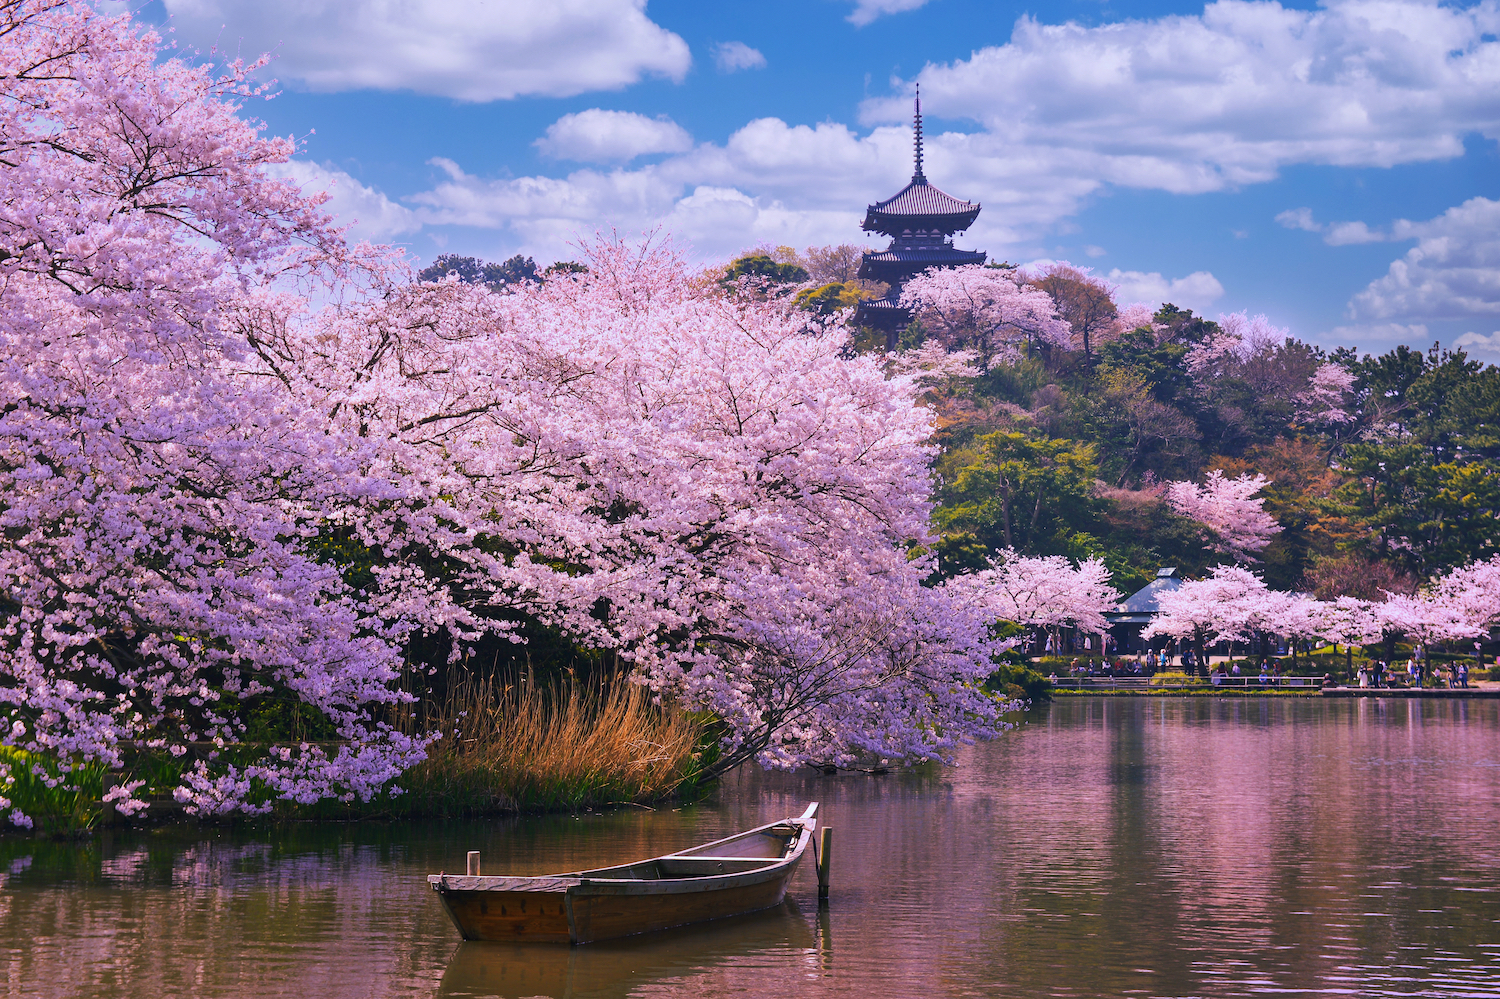 Pink sakura flowers over the river with a boat